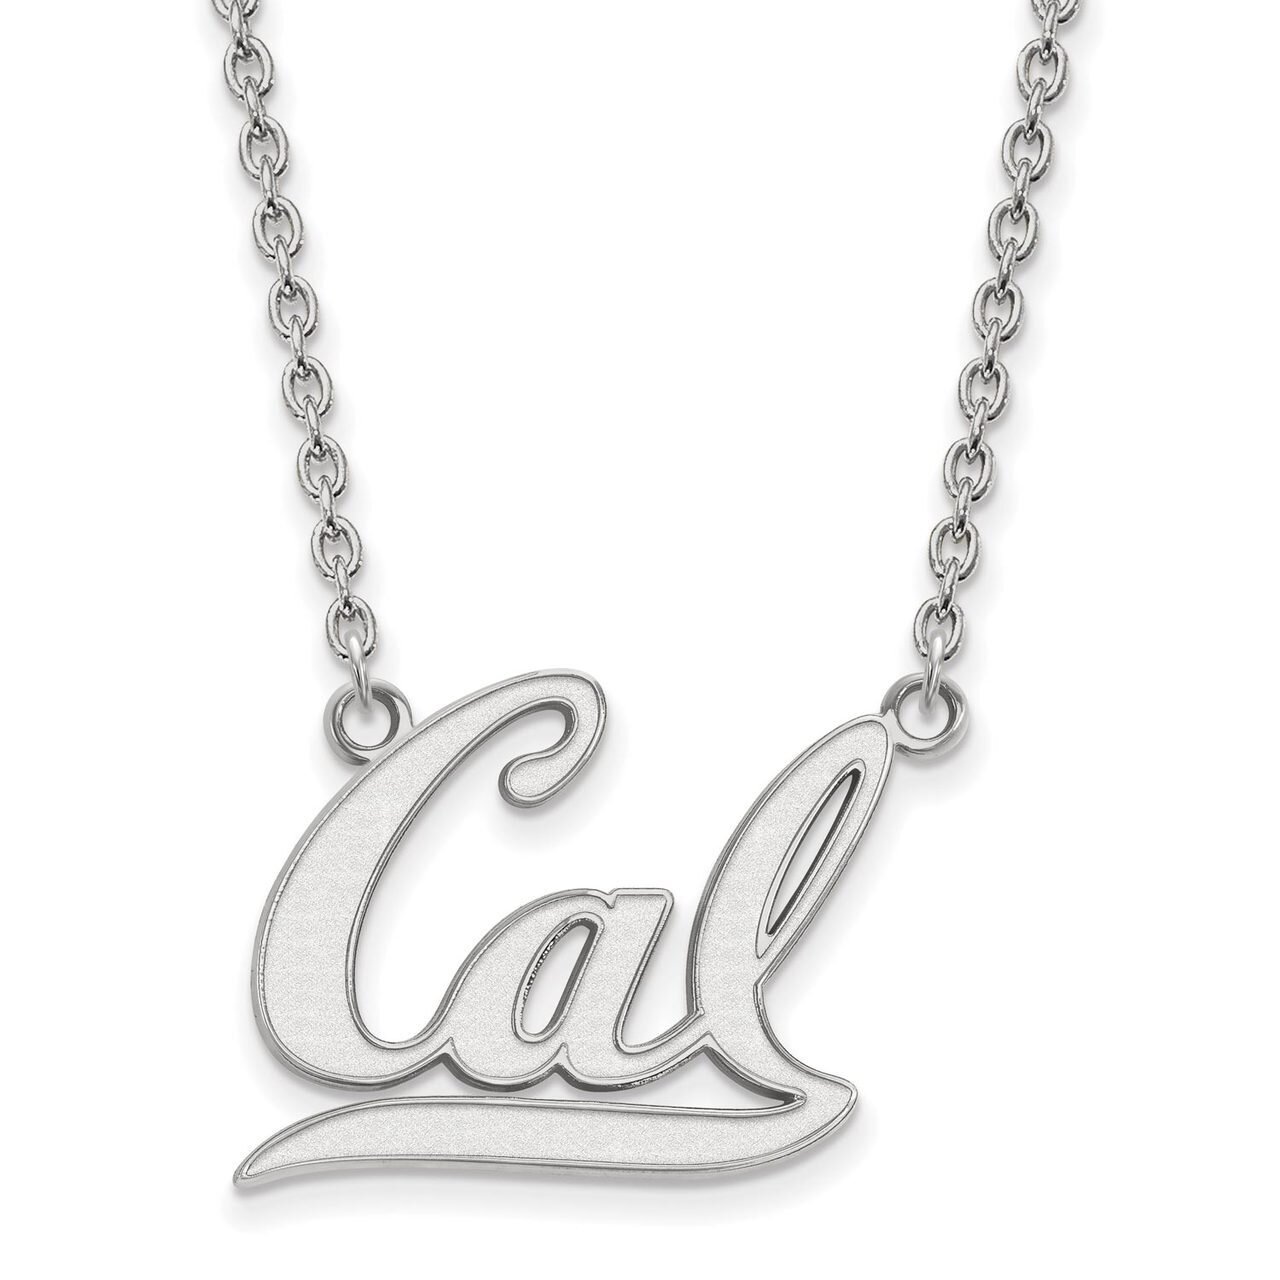 University of California Berkeley Large Pendant with Necklace Sterling Silver SS012UCB-18